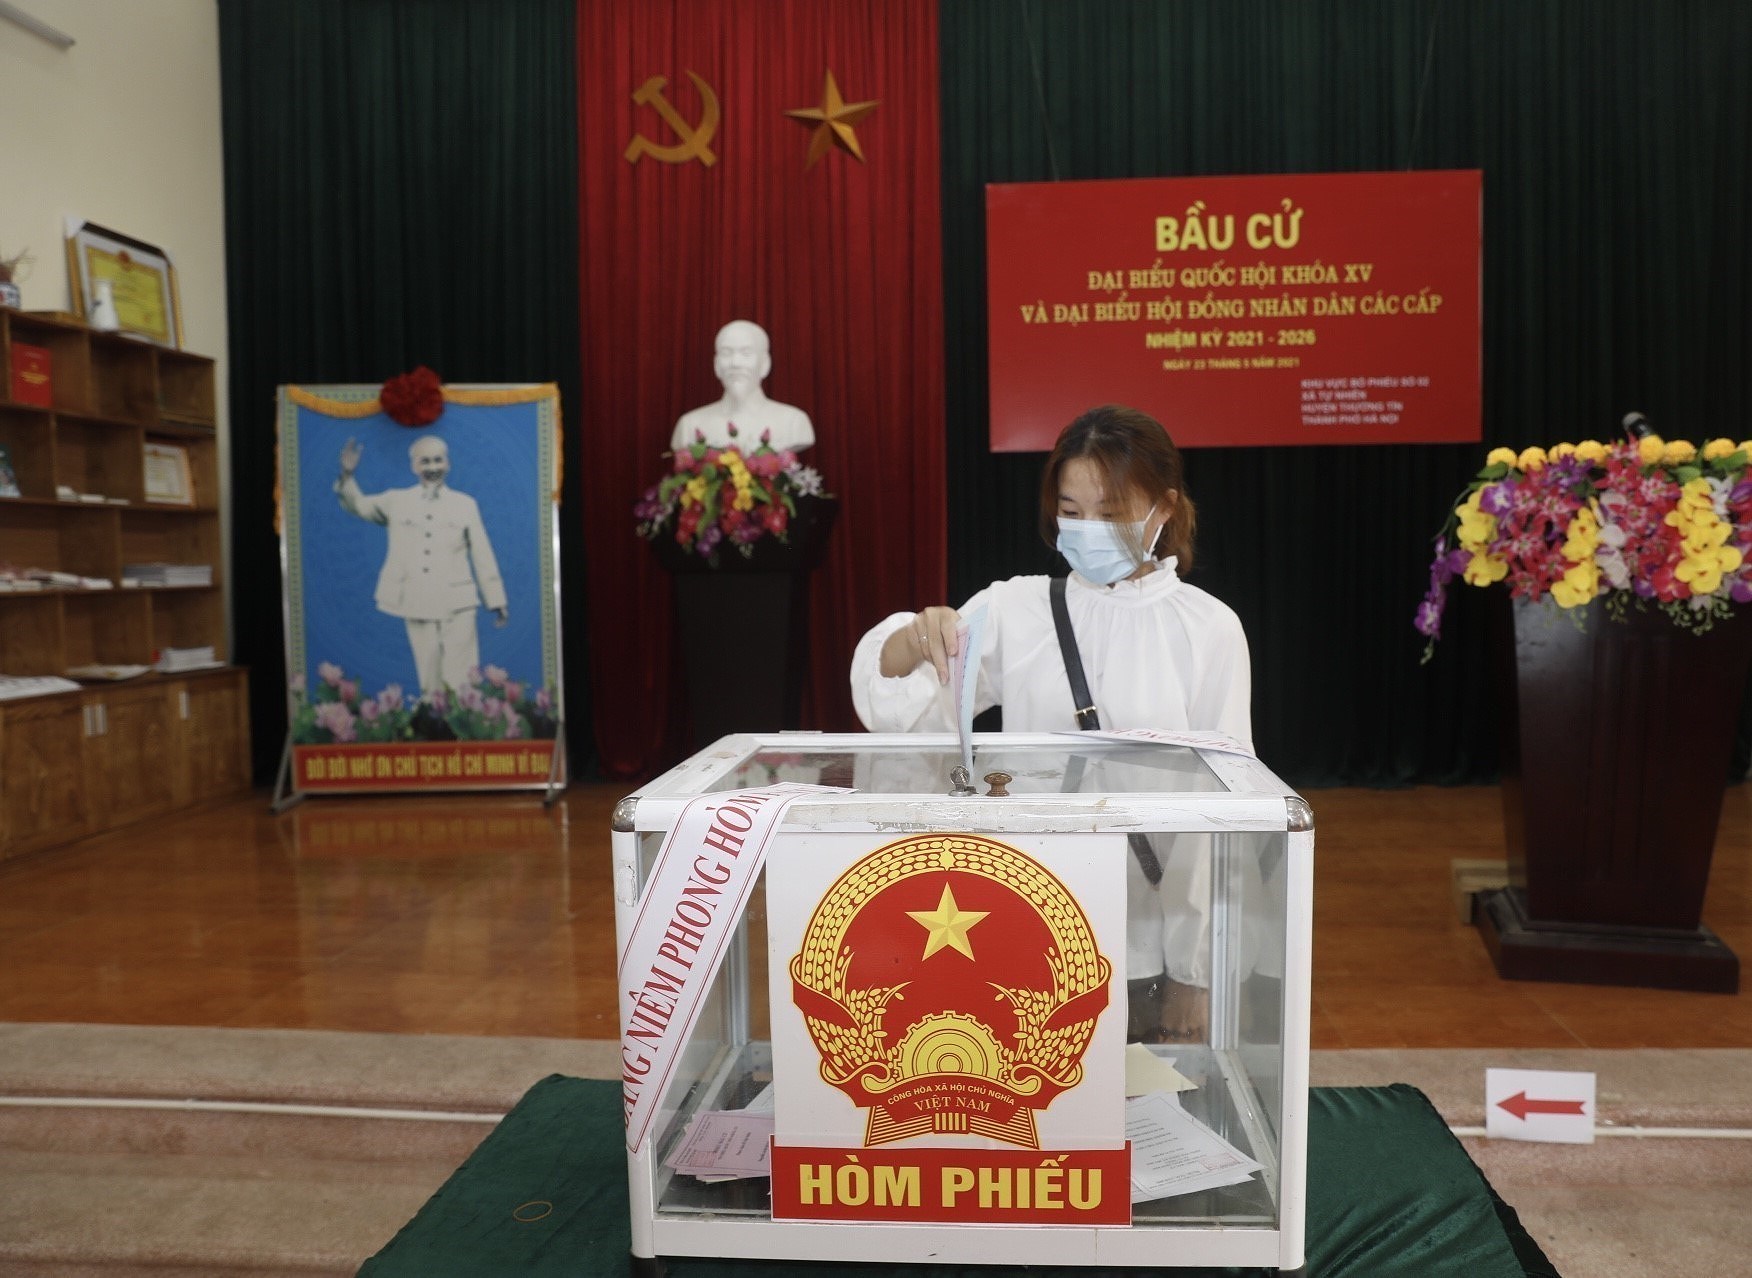 5.4 million voters in Hanoi go to poll hinh anh 6